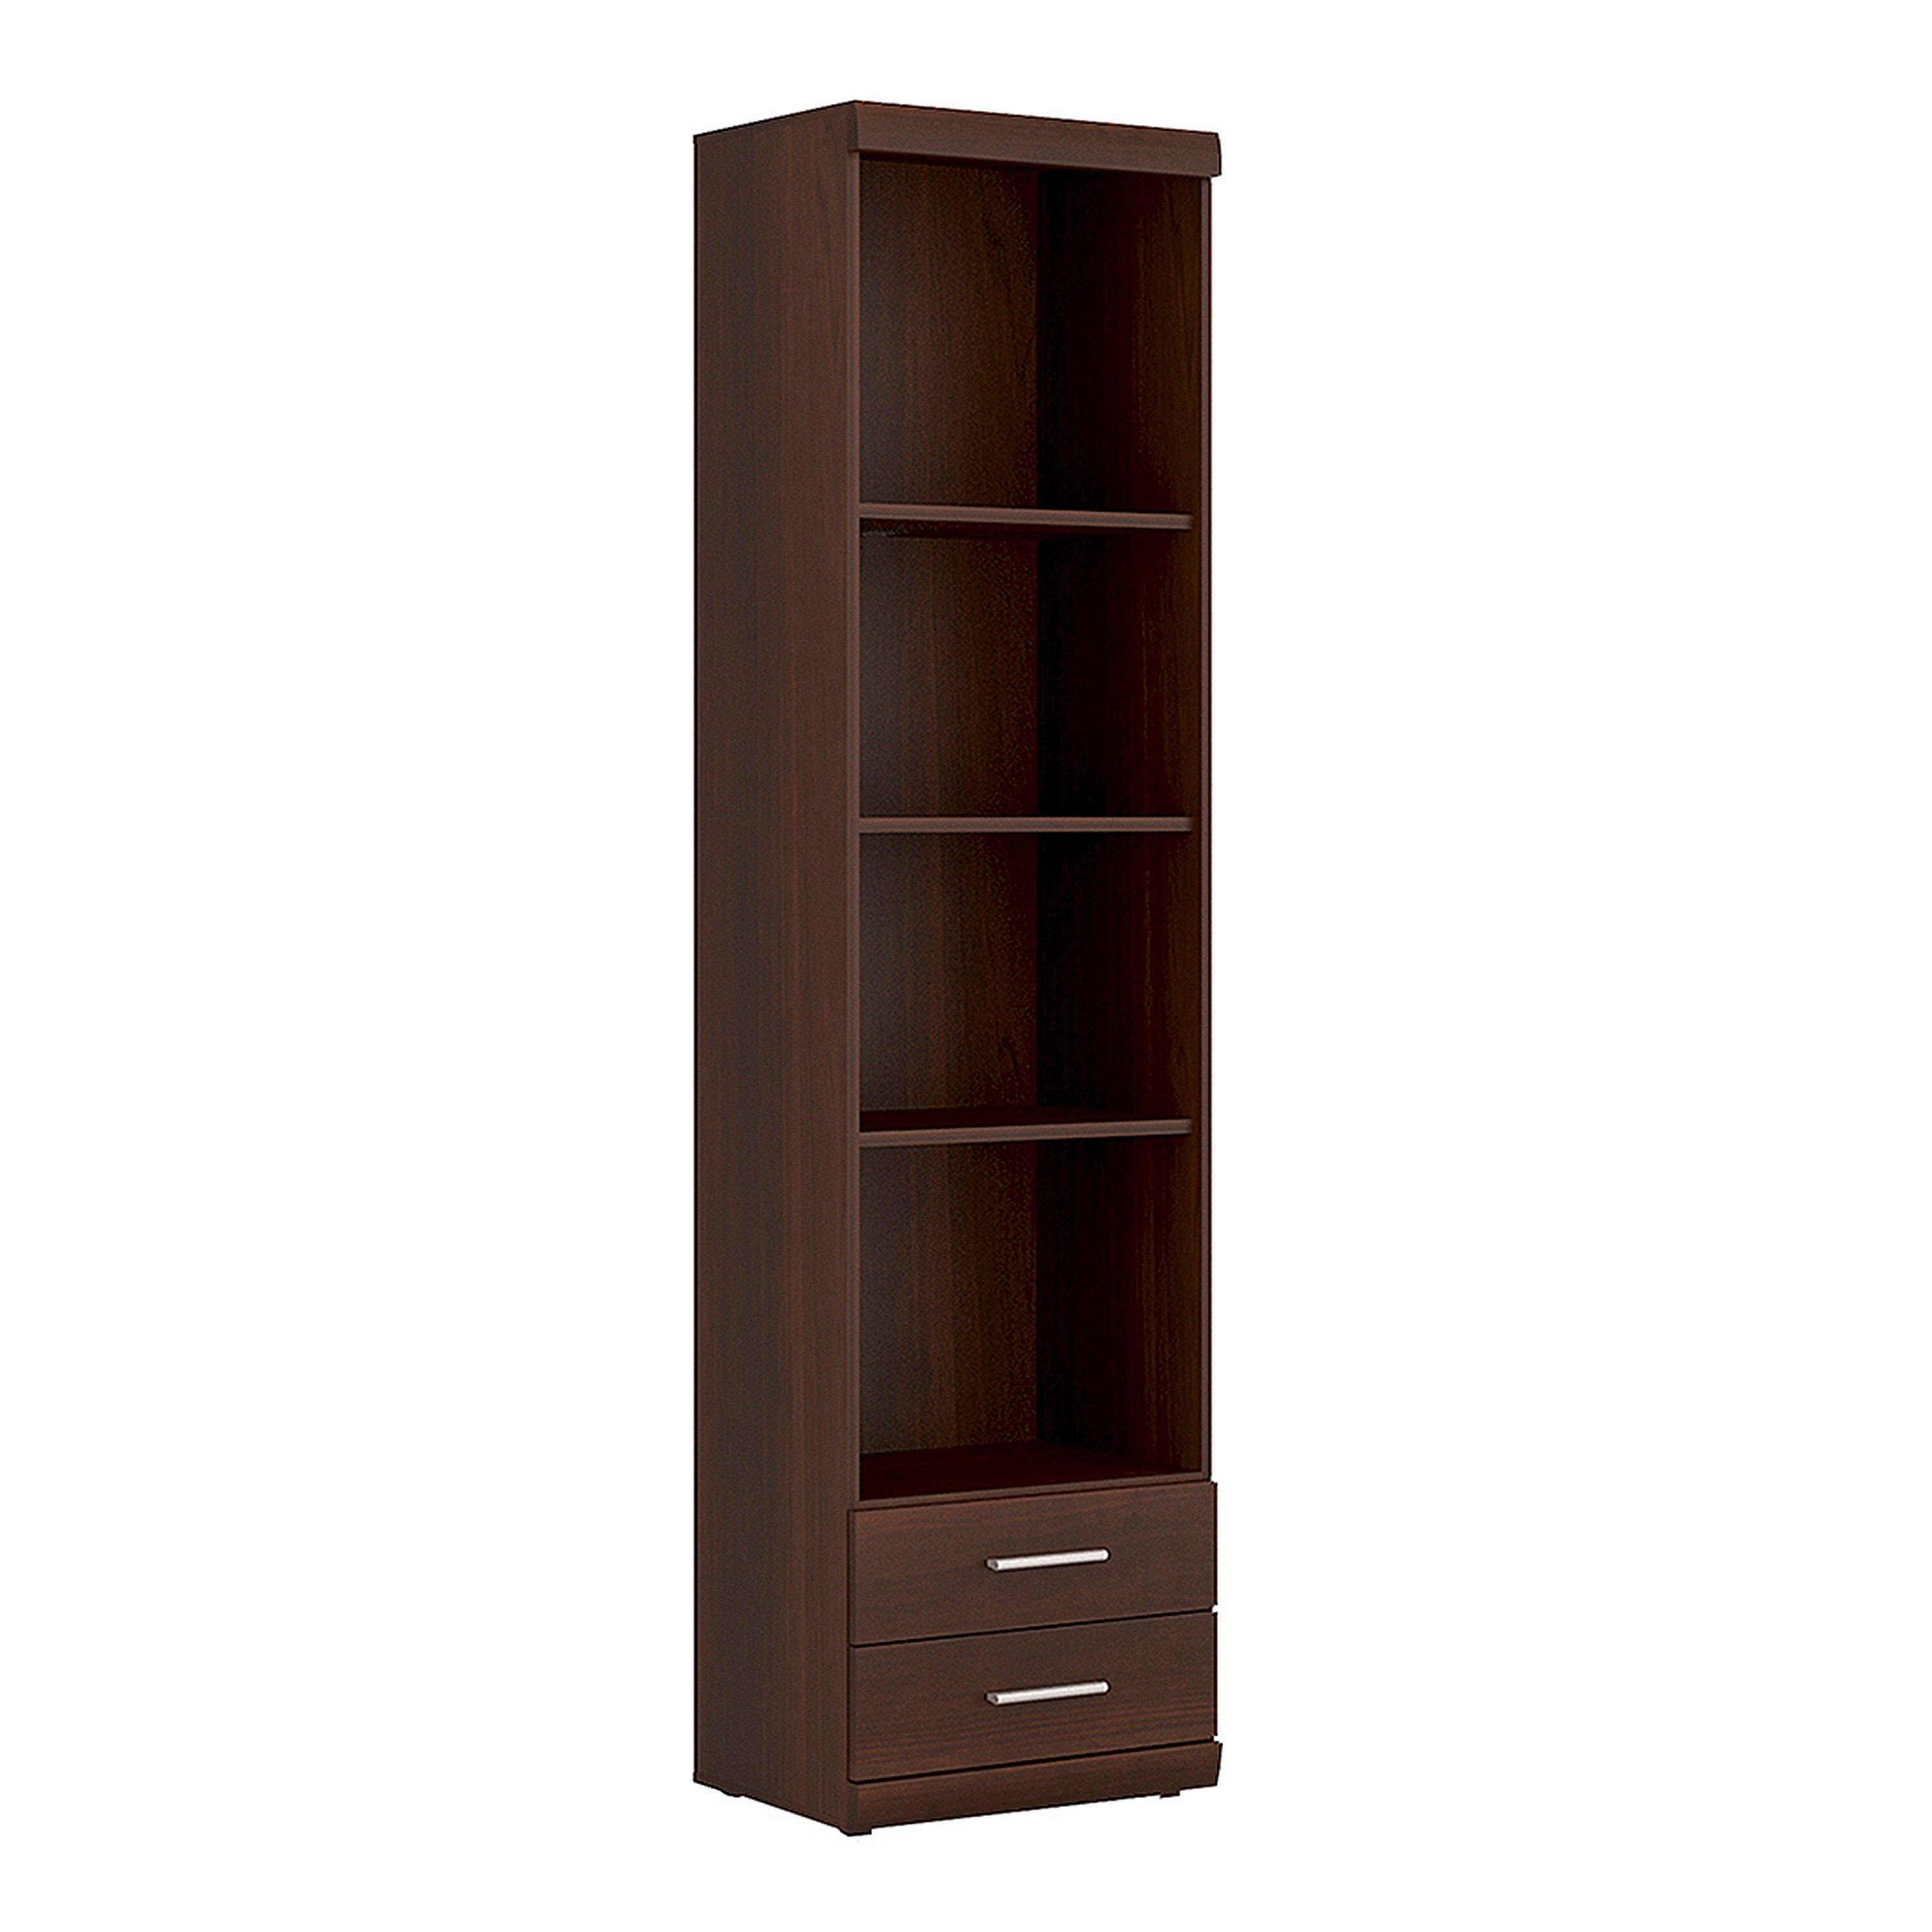 Imperial Tall 2 Drawer Narrow Cabinet with Open Shelving - image 1